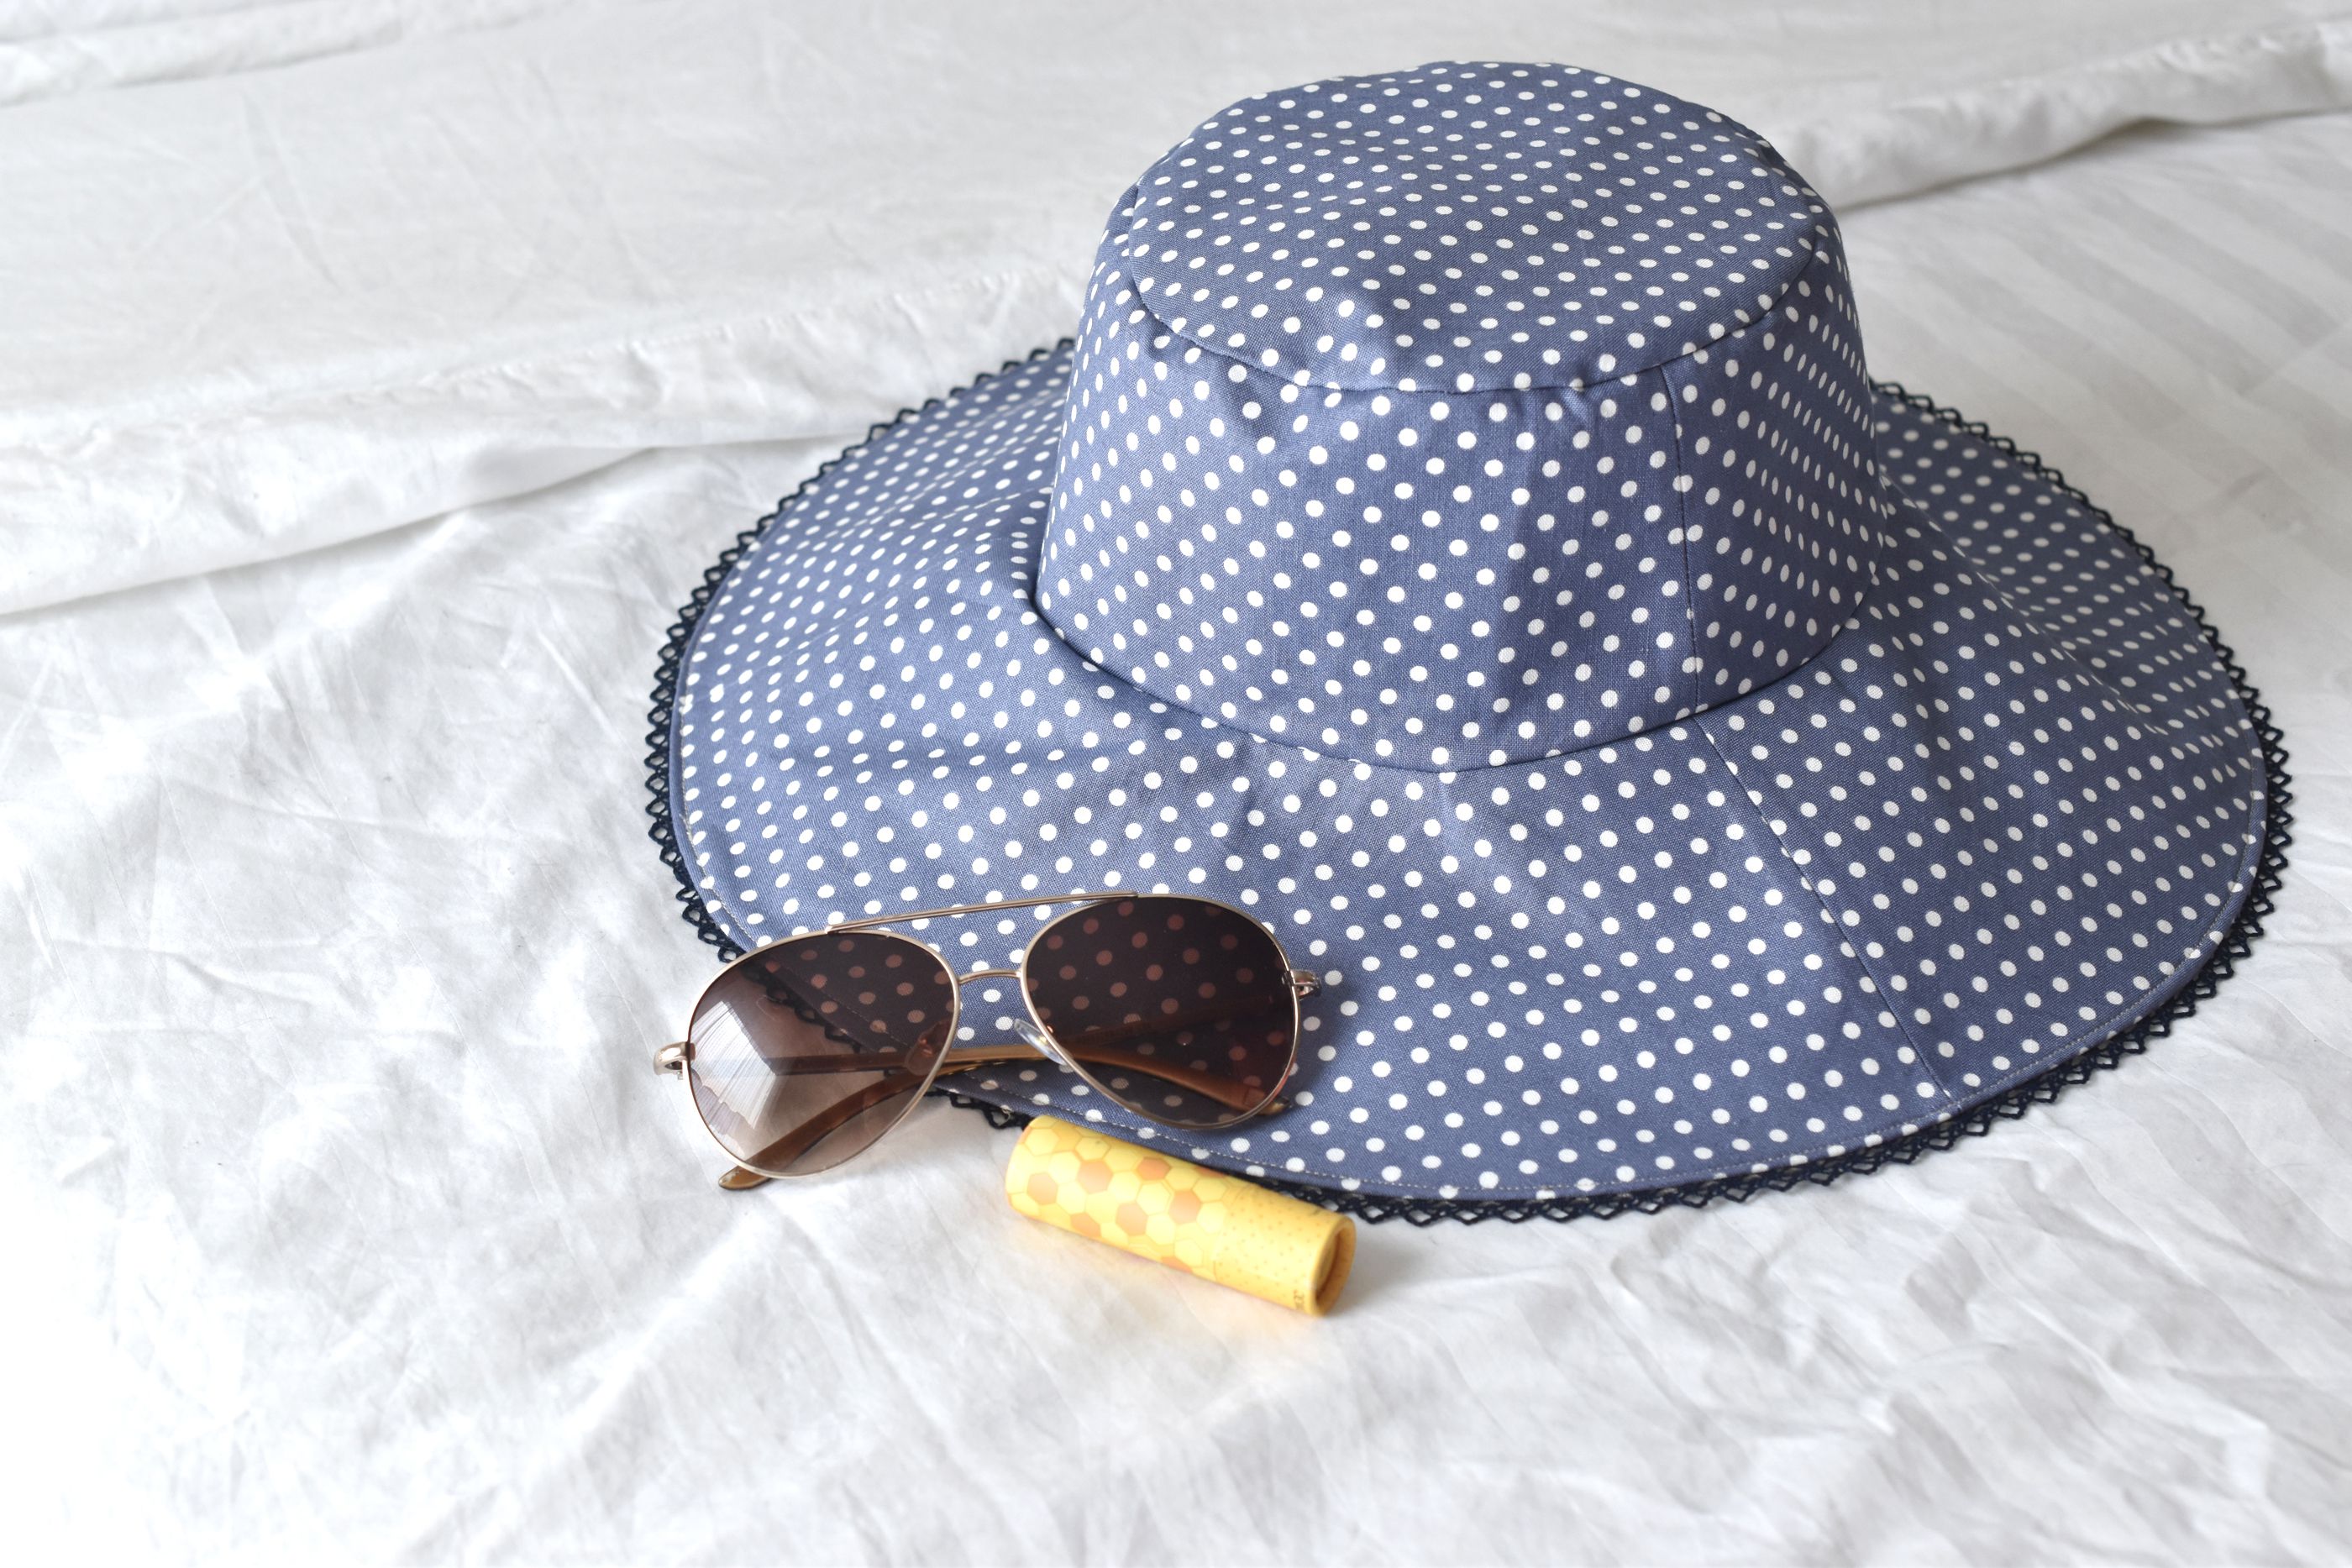 How To Sew A Reversible Sun Hat